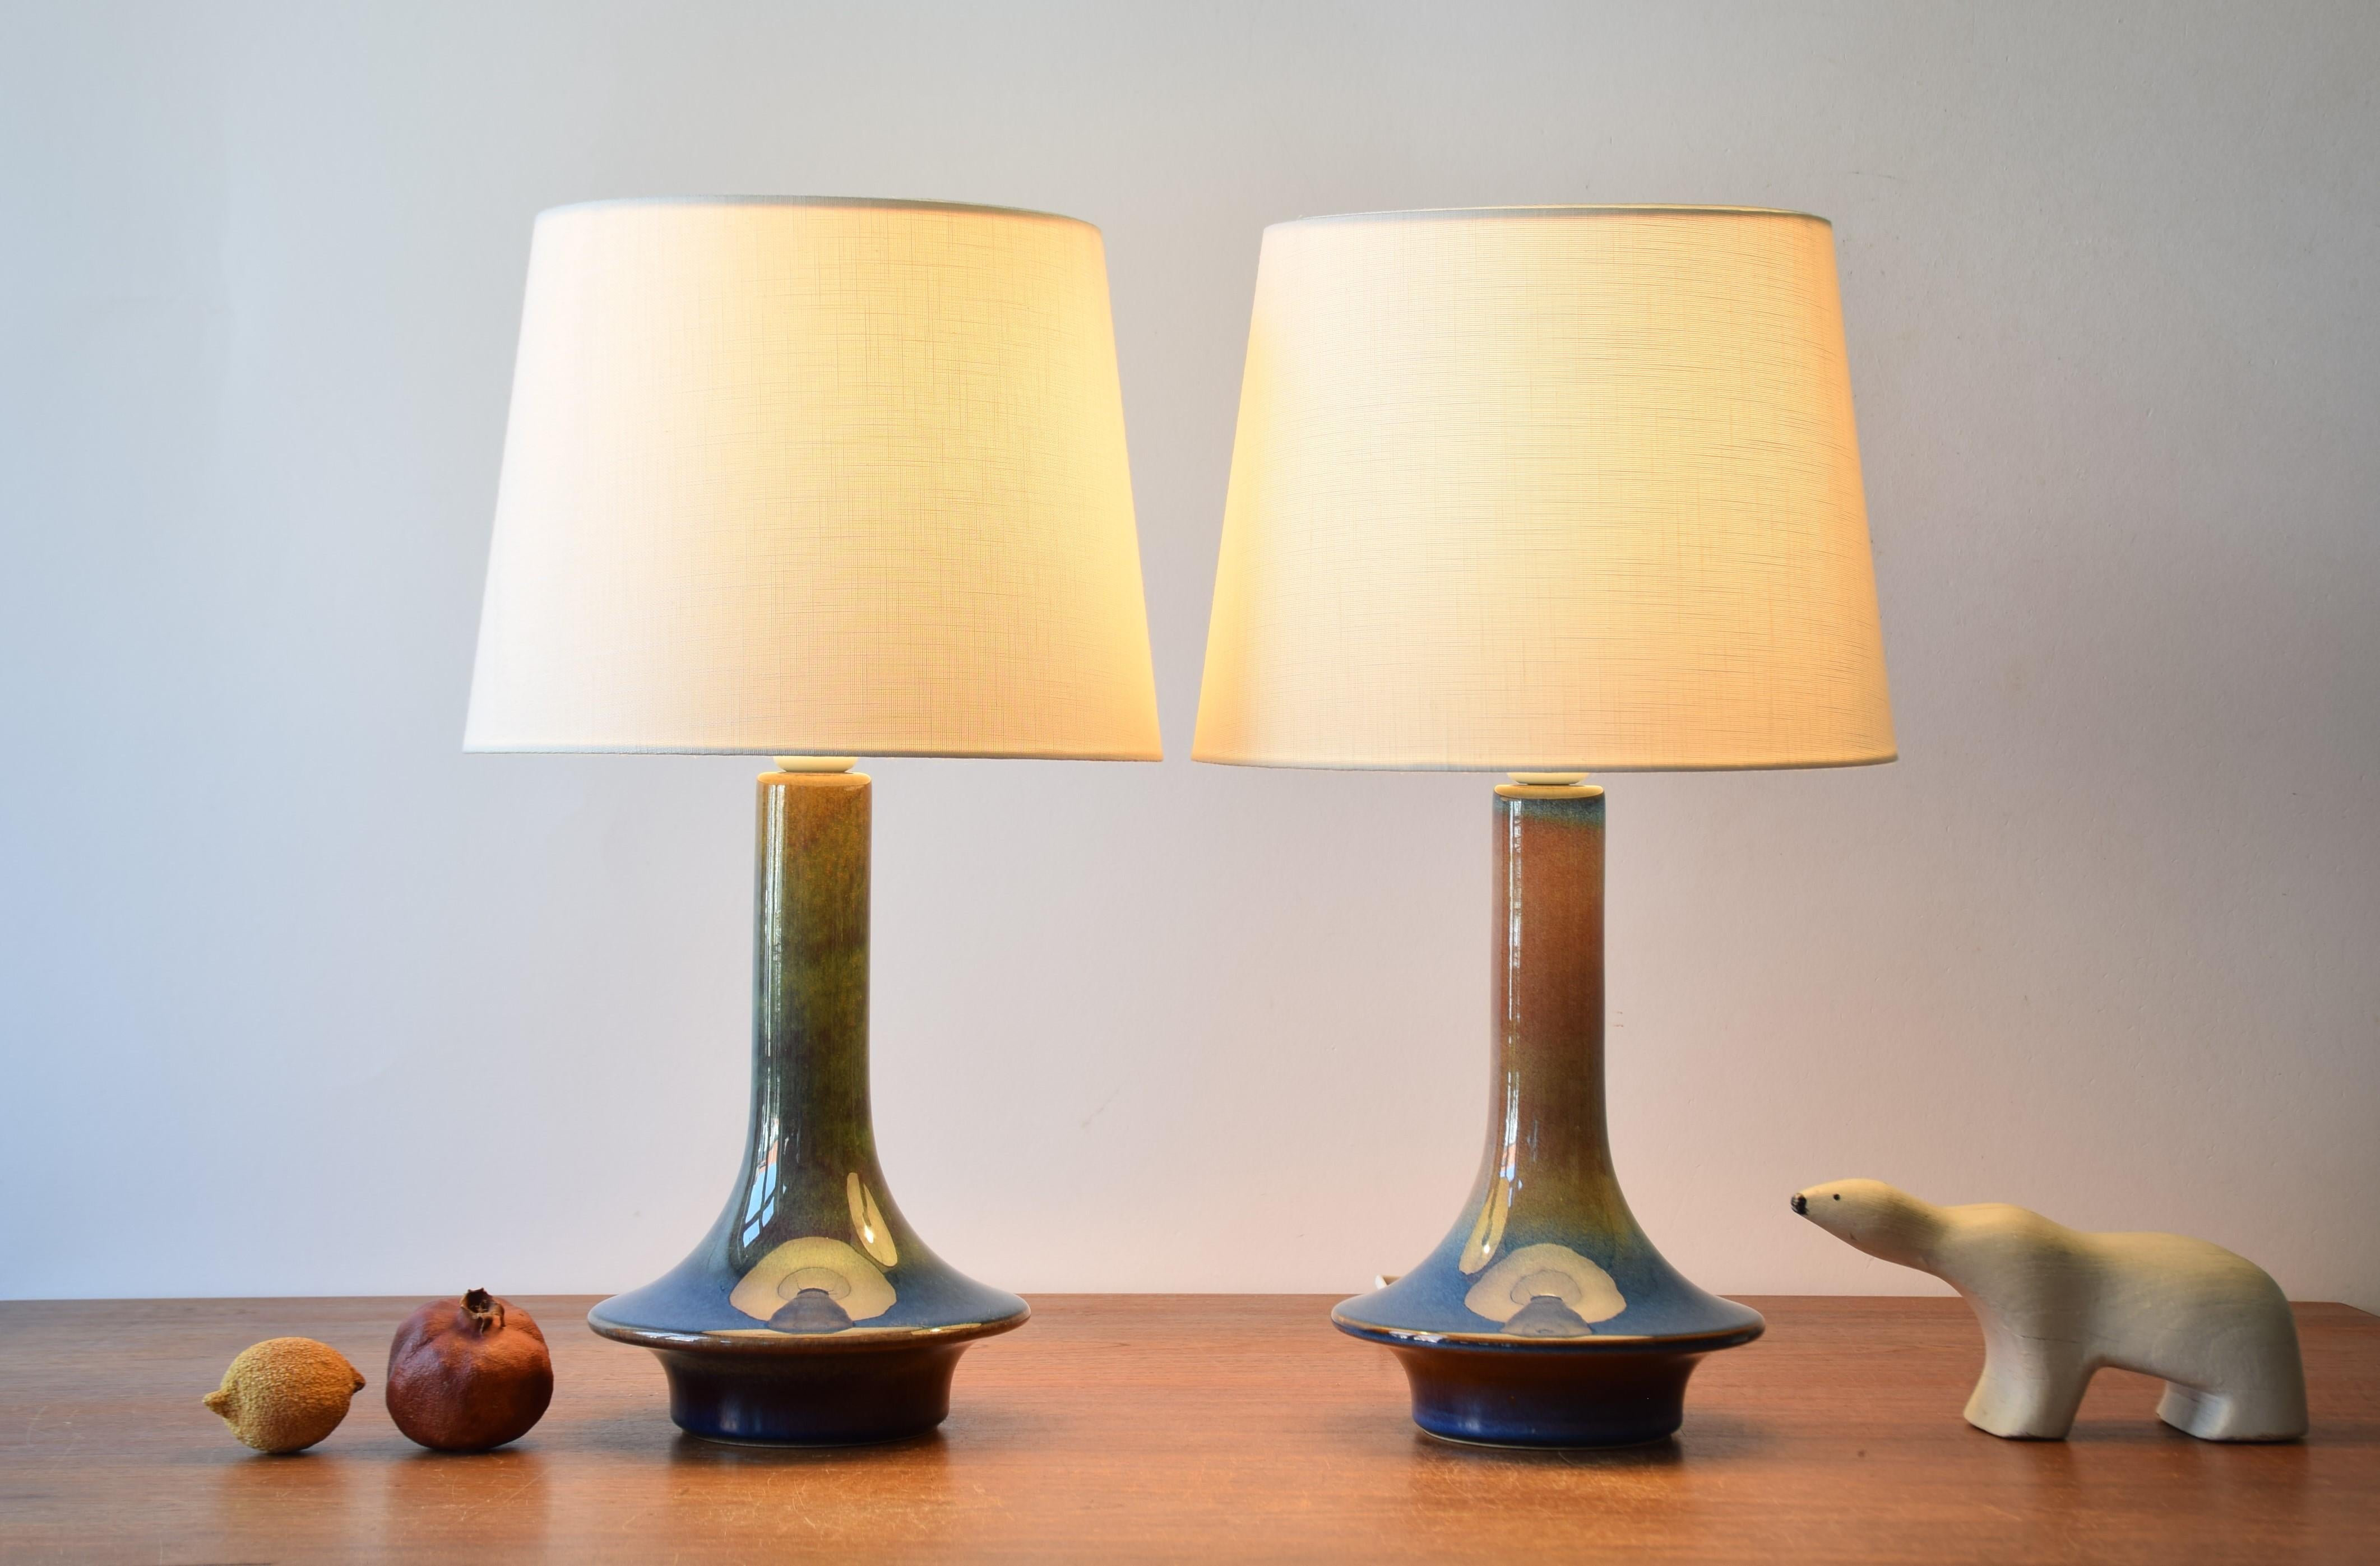 Rare pair of sculptural table lamps from Søholm Stentøj, Denmark, circa 1960s.
The lamps have glaze with a beautiful color play in blue, purple and brown.

Included are a new lamp shades designed and made in Denmark. They are made of woven fabric